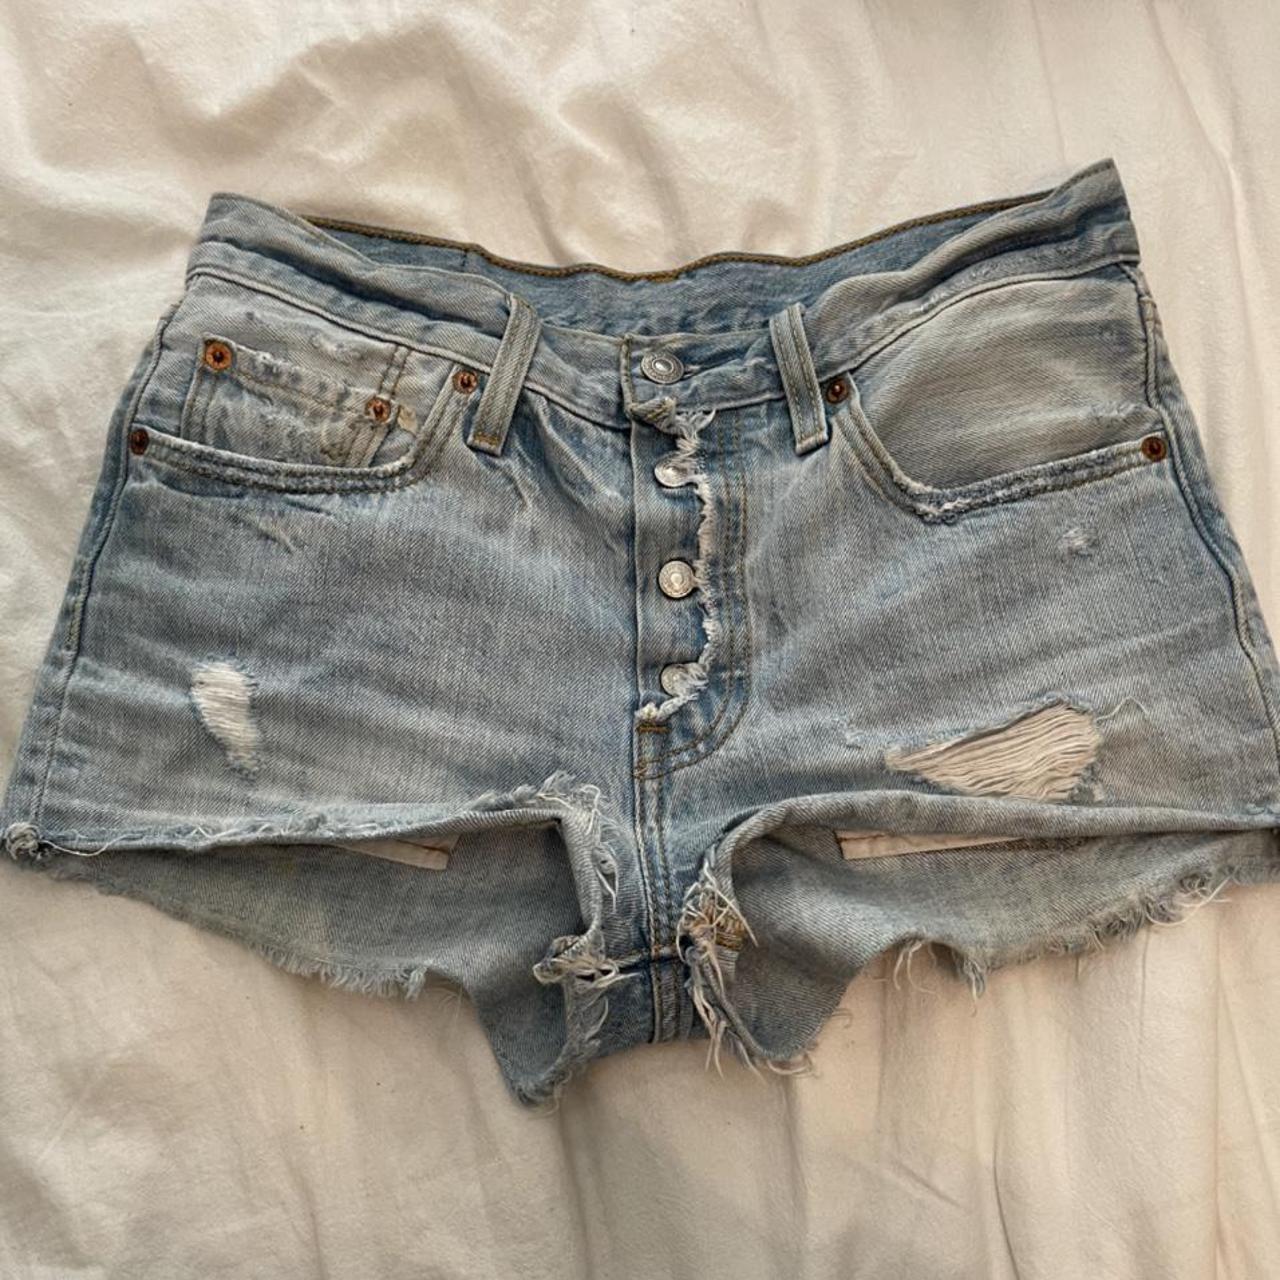 Product Image 1 - vintage levi’s distressed shorts. has